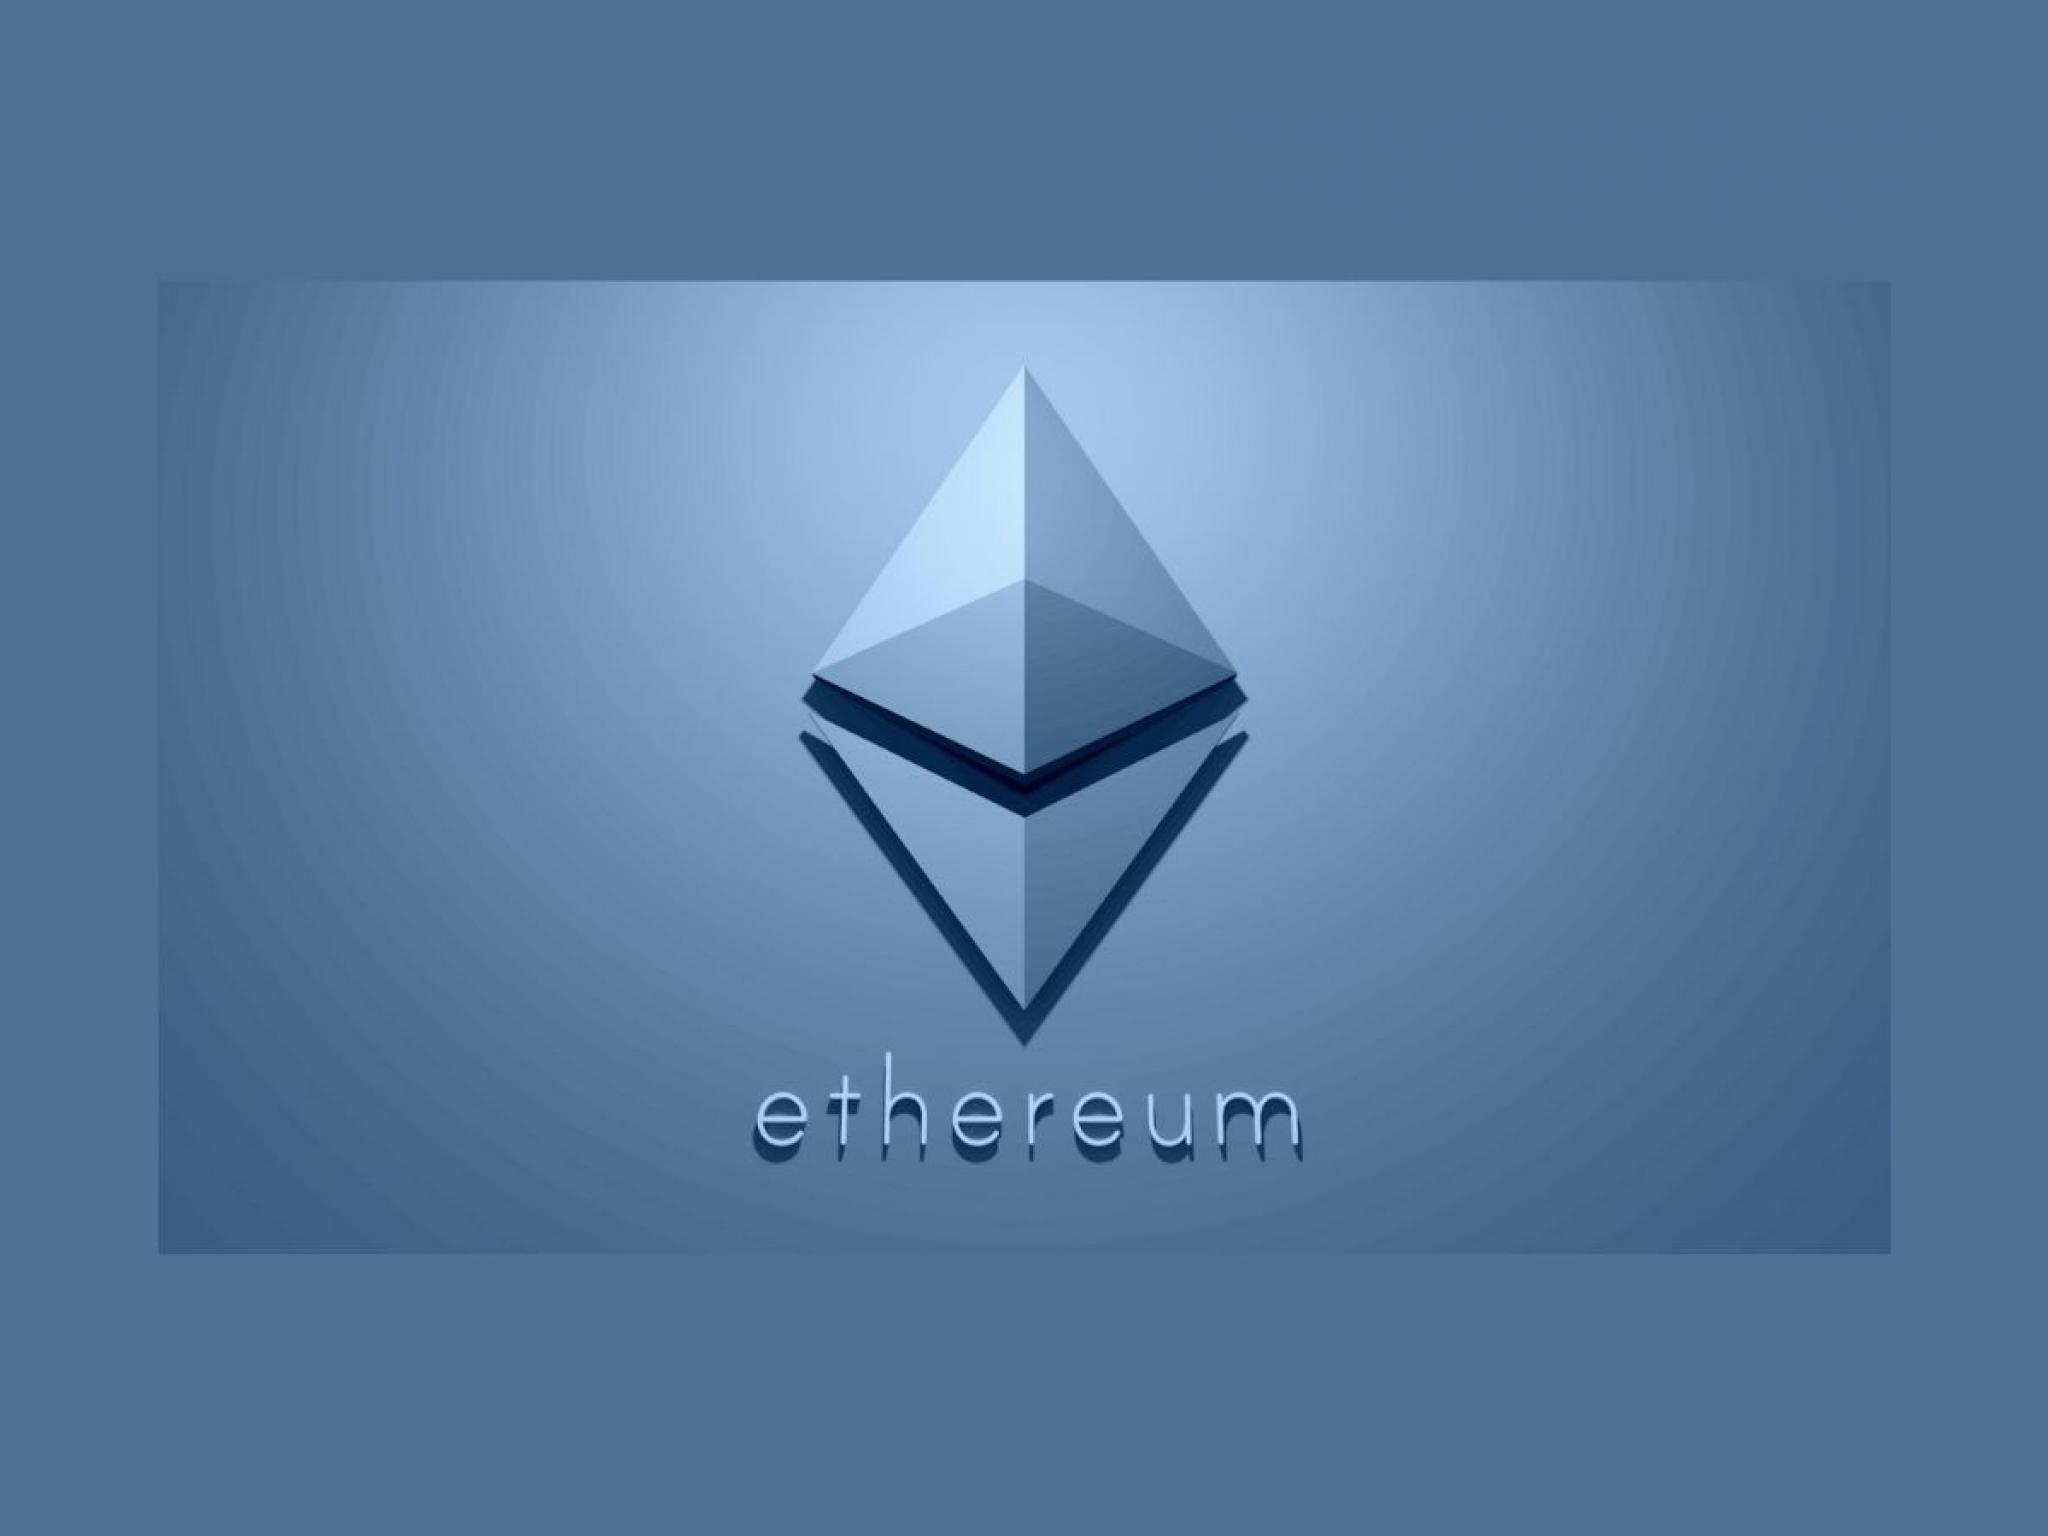  ethereum-surpasses-3000-flare-emerges-as-top-gainer 